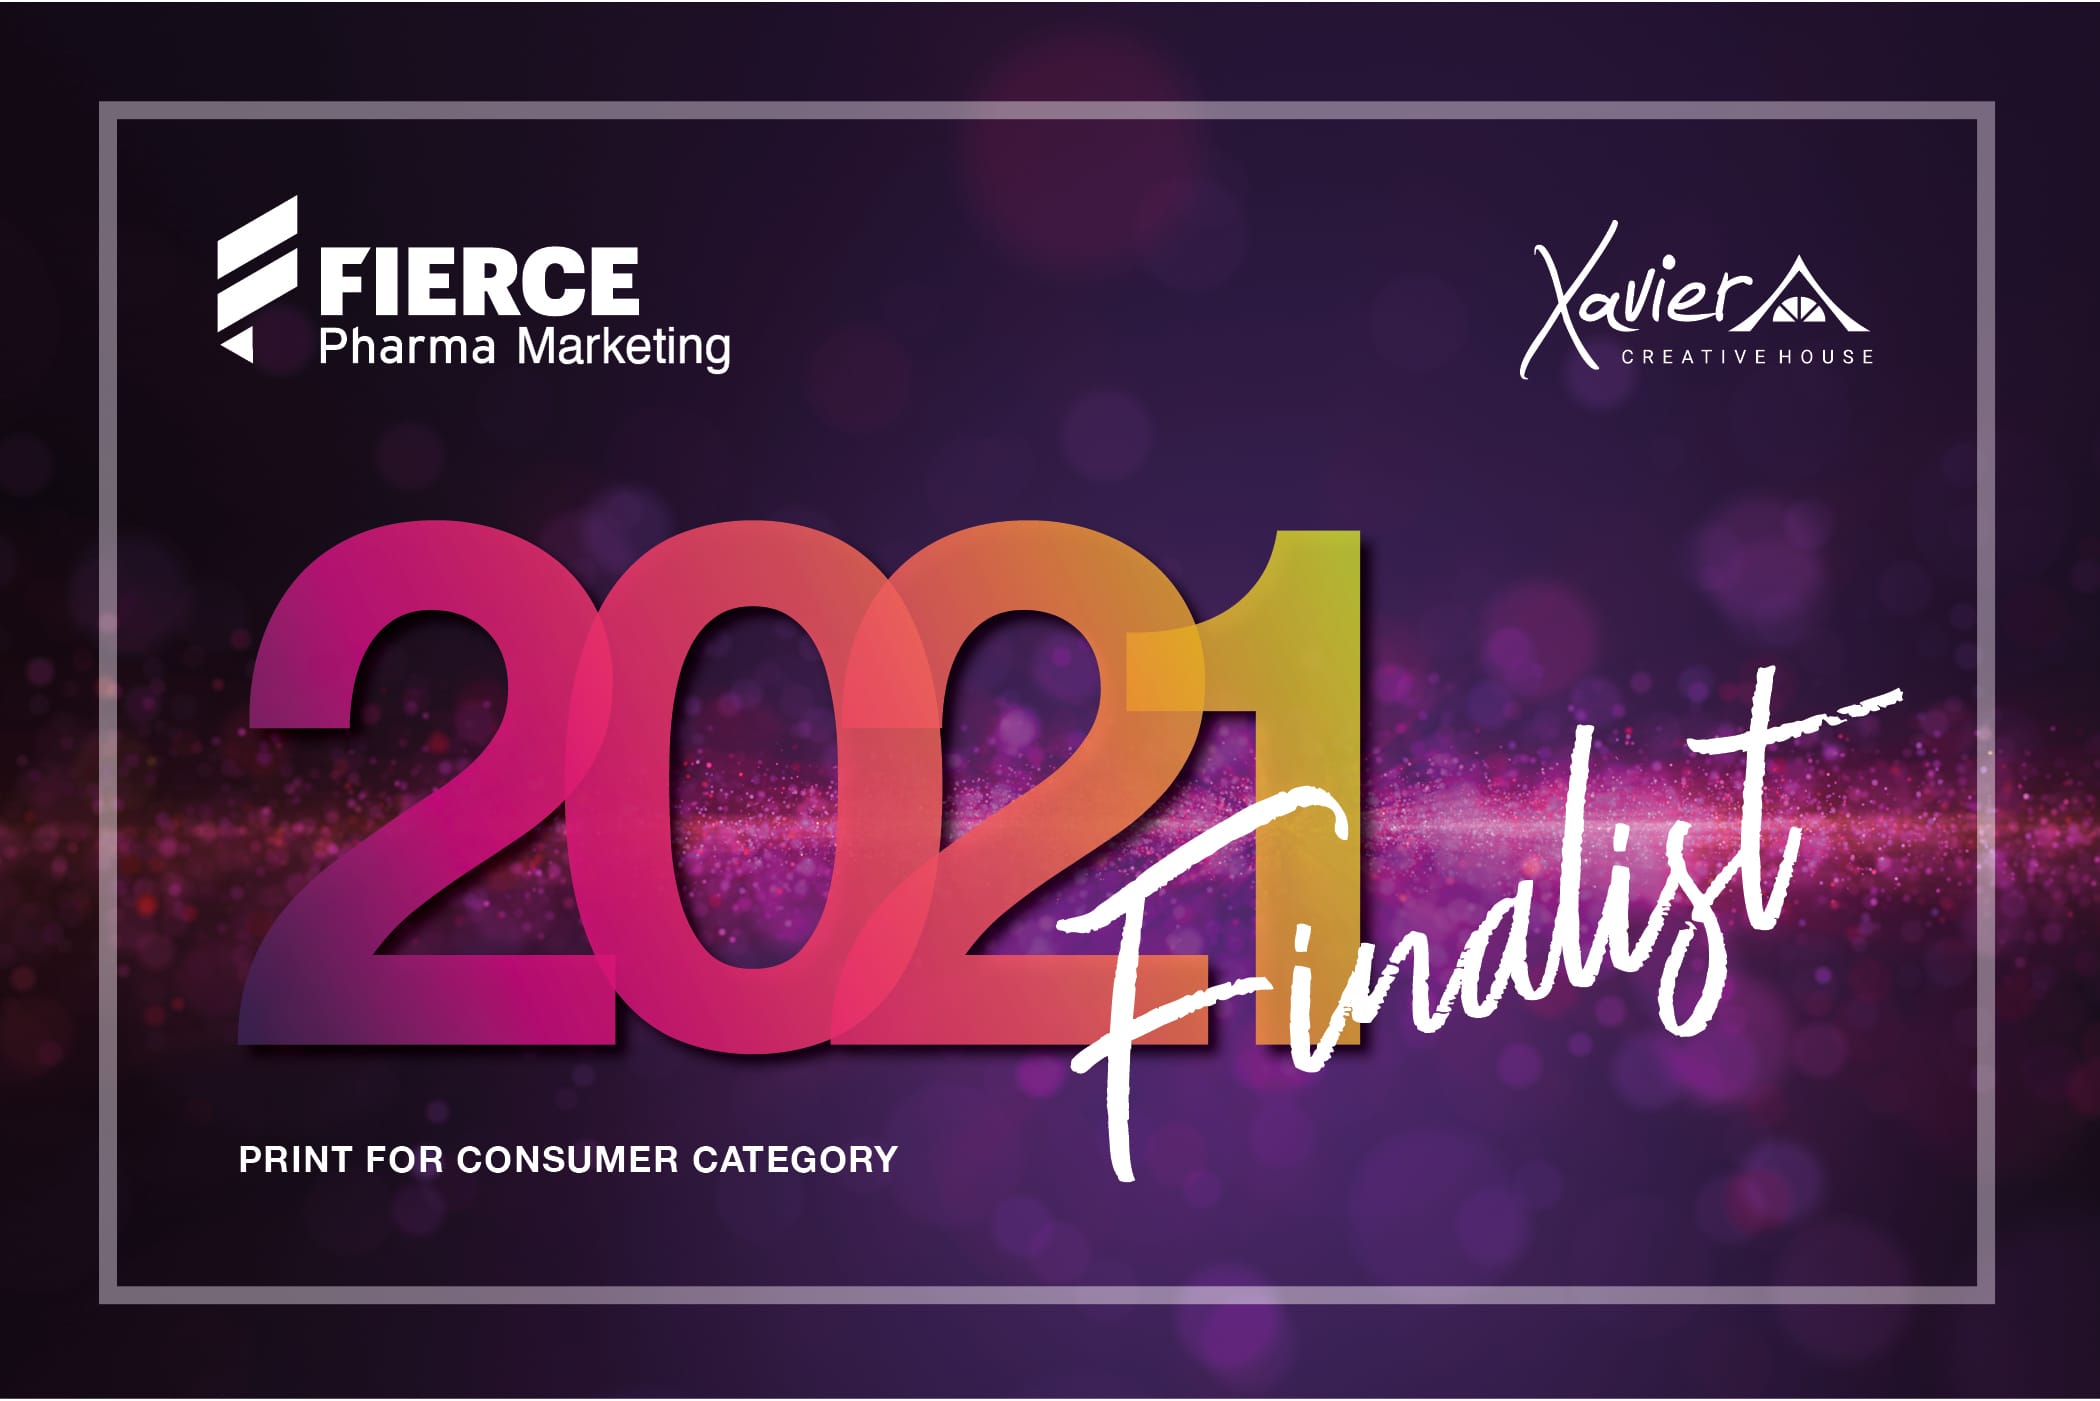 XAVIER CREATIVE HOUSE has been recognized as a Winner in the Fierce Pharma  Marketing Awards 2021, in the Print for Consumer Category - Xavier Creative  House